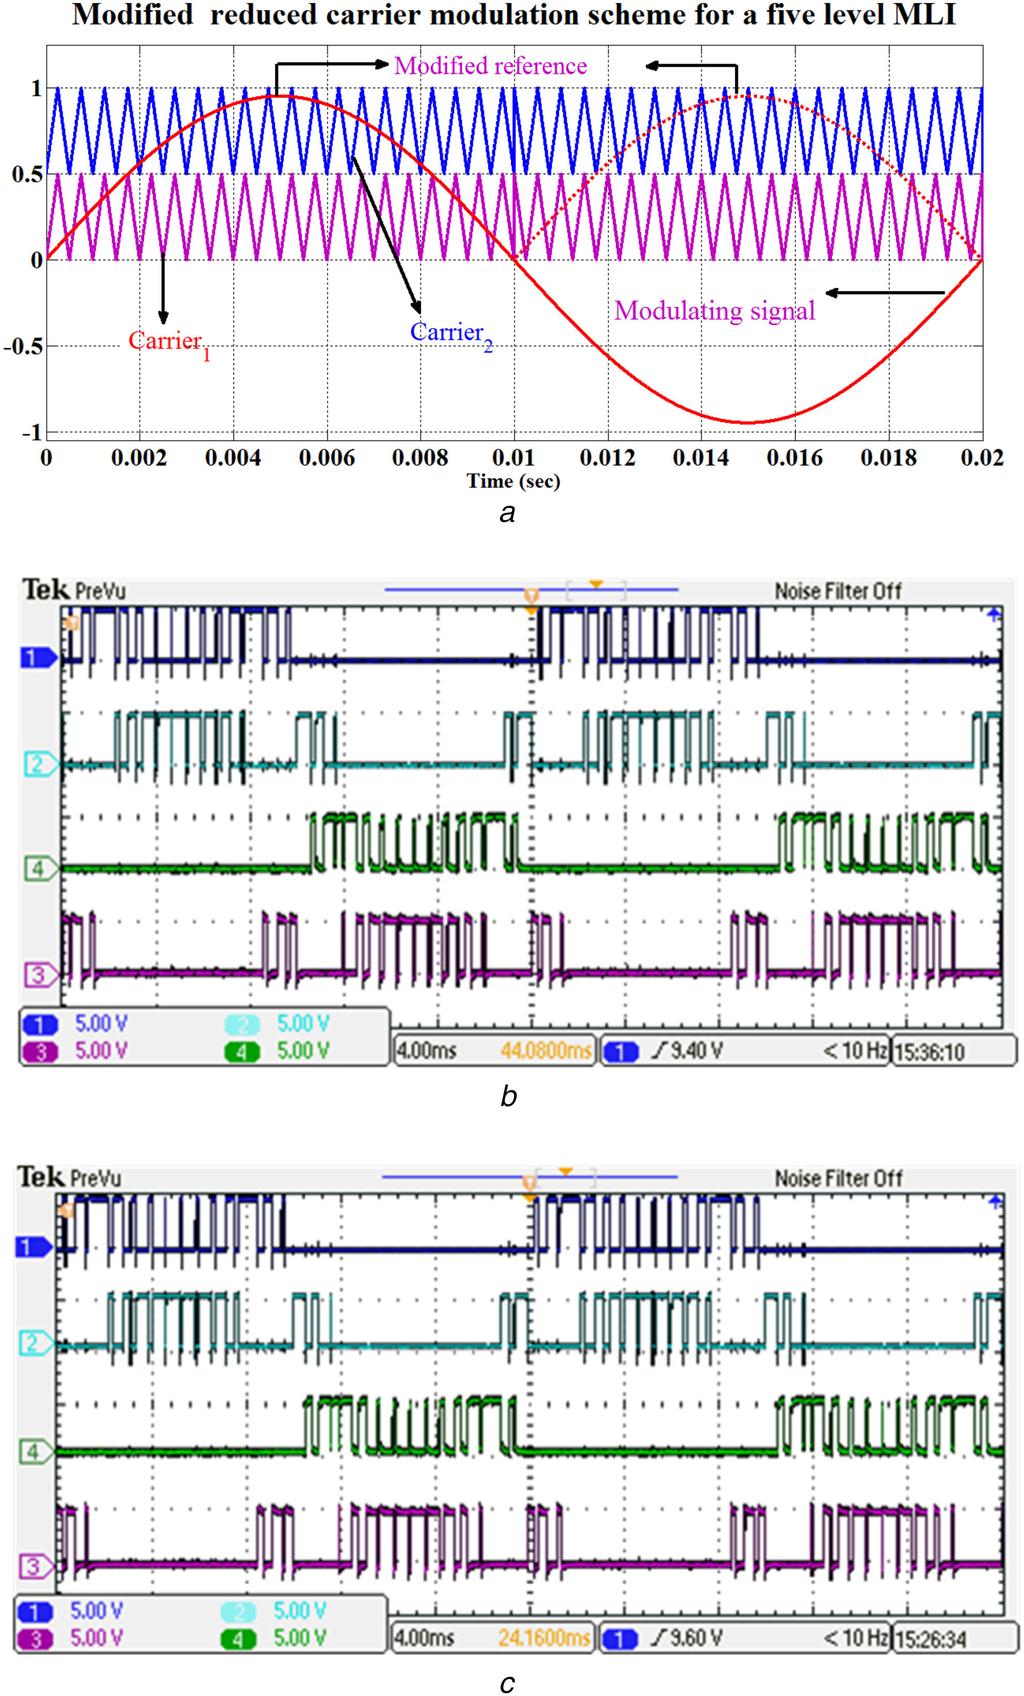 Fig. 5 Five-level T-type MLI PWM (a) Carrier arrangement of reduced carrier scheme for five levels in phase, (b) Switching pulses of modified multi-reference dual-carrier modulation, (c) Switching